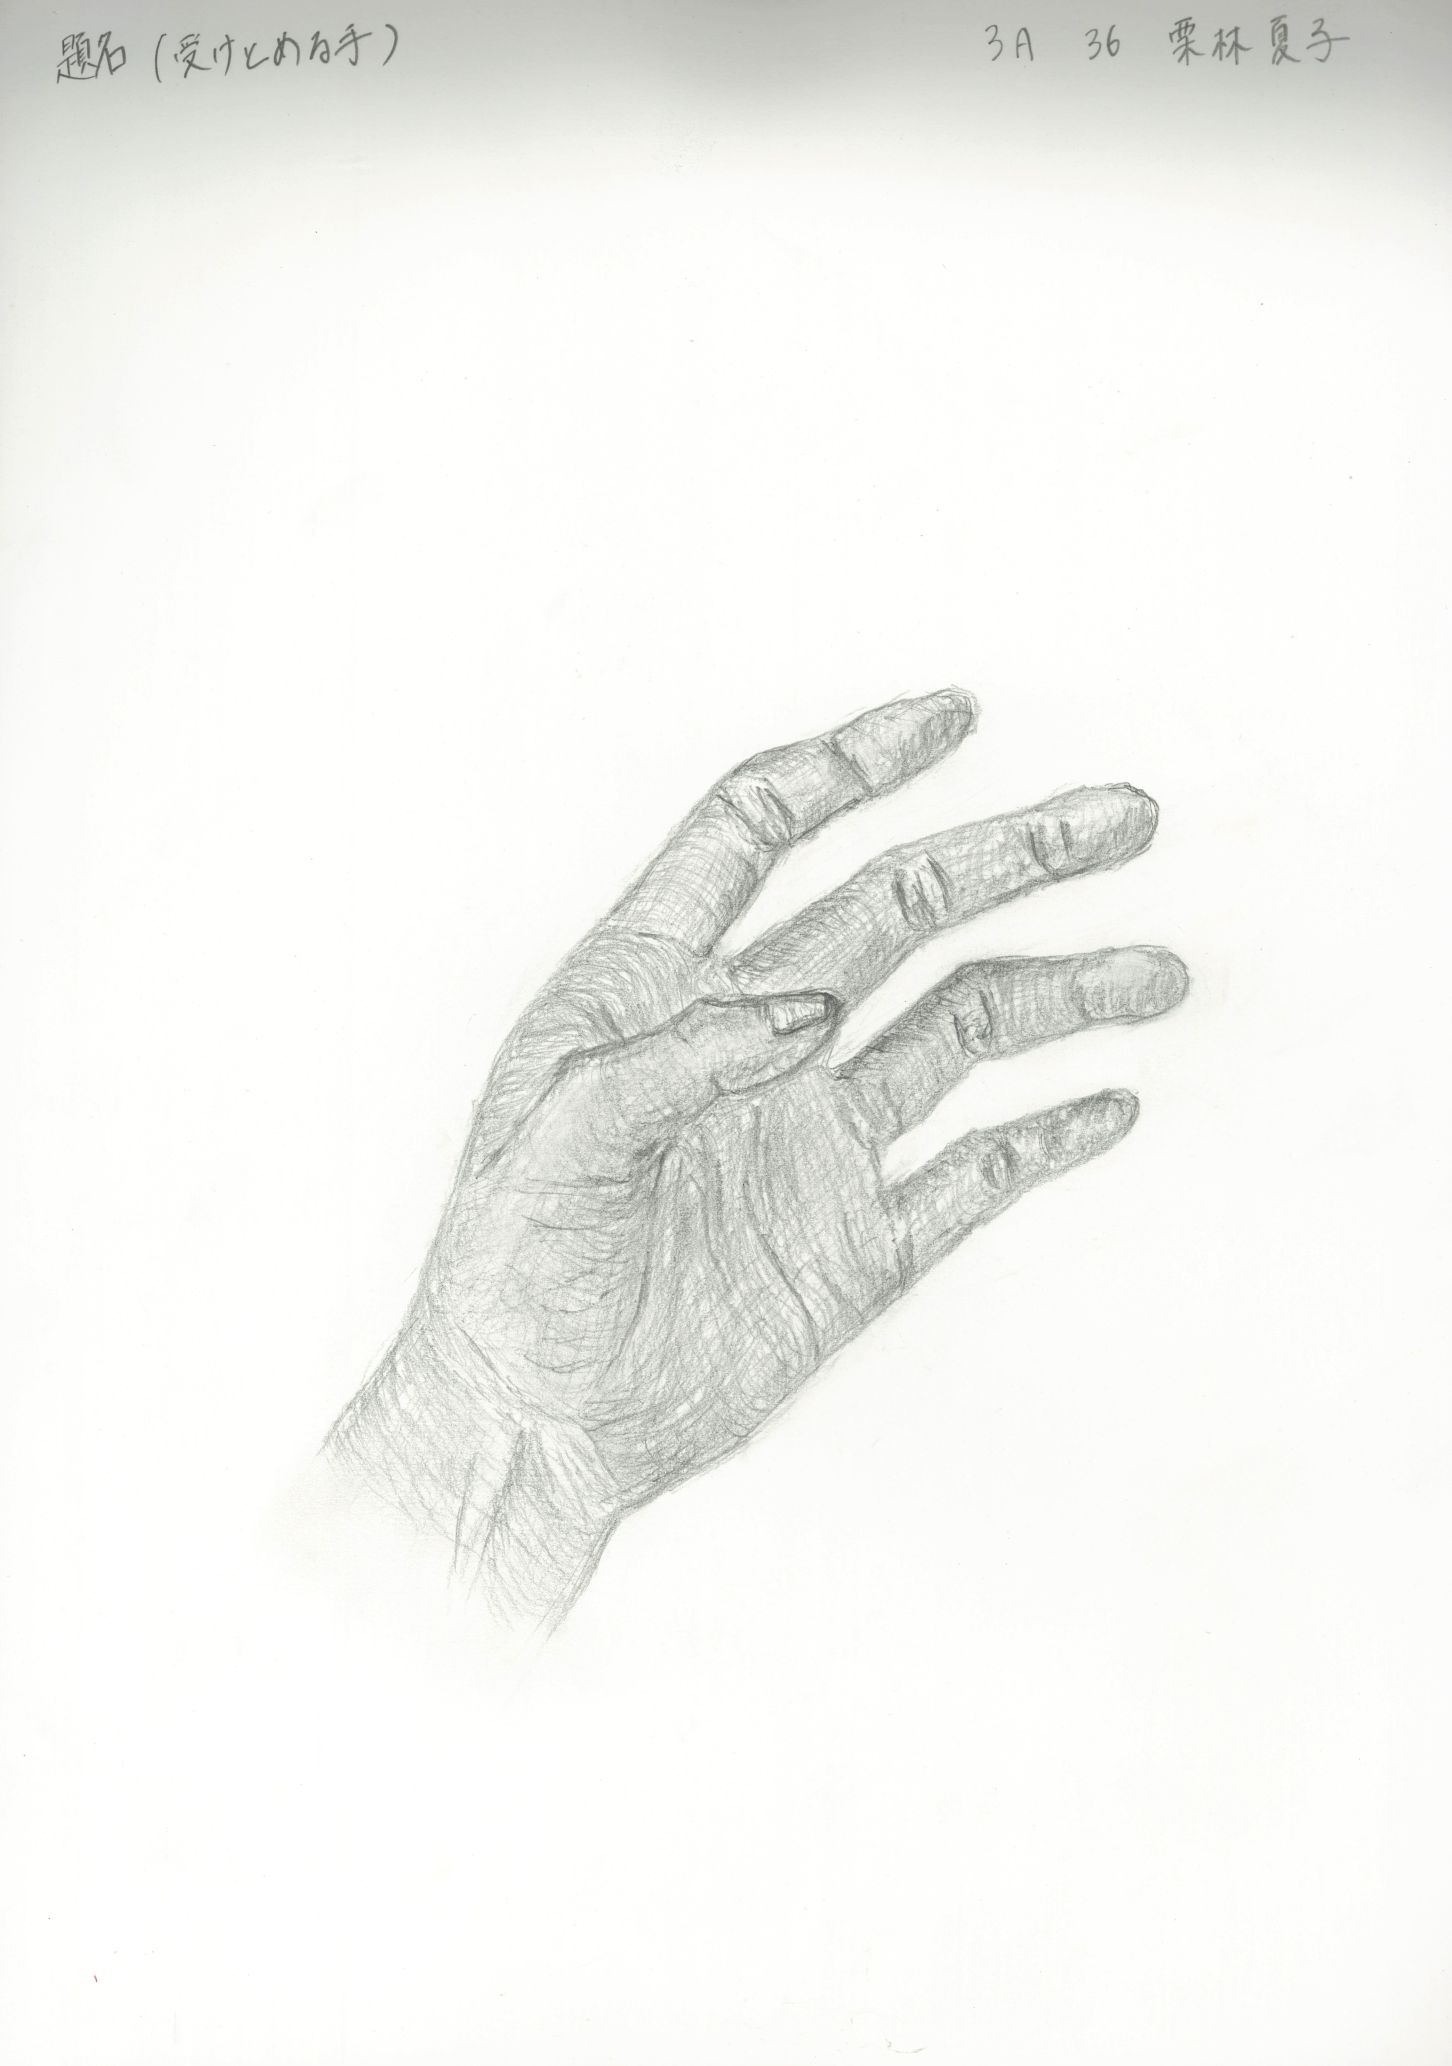 Student artwork – Hand to catch